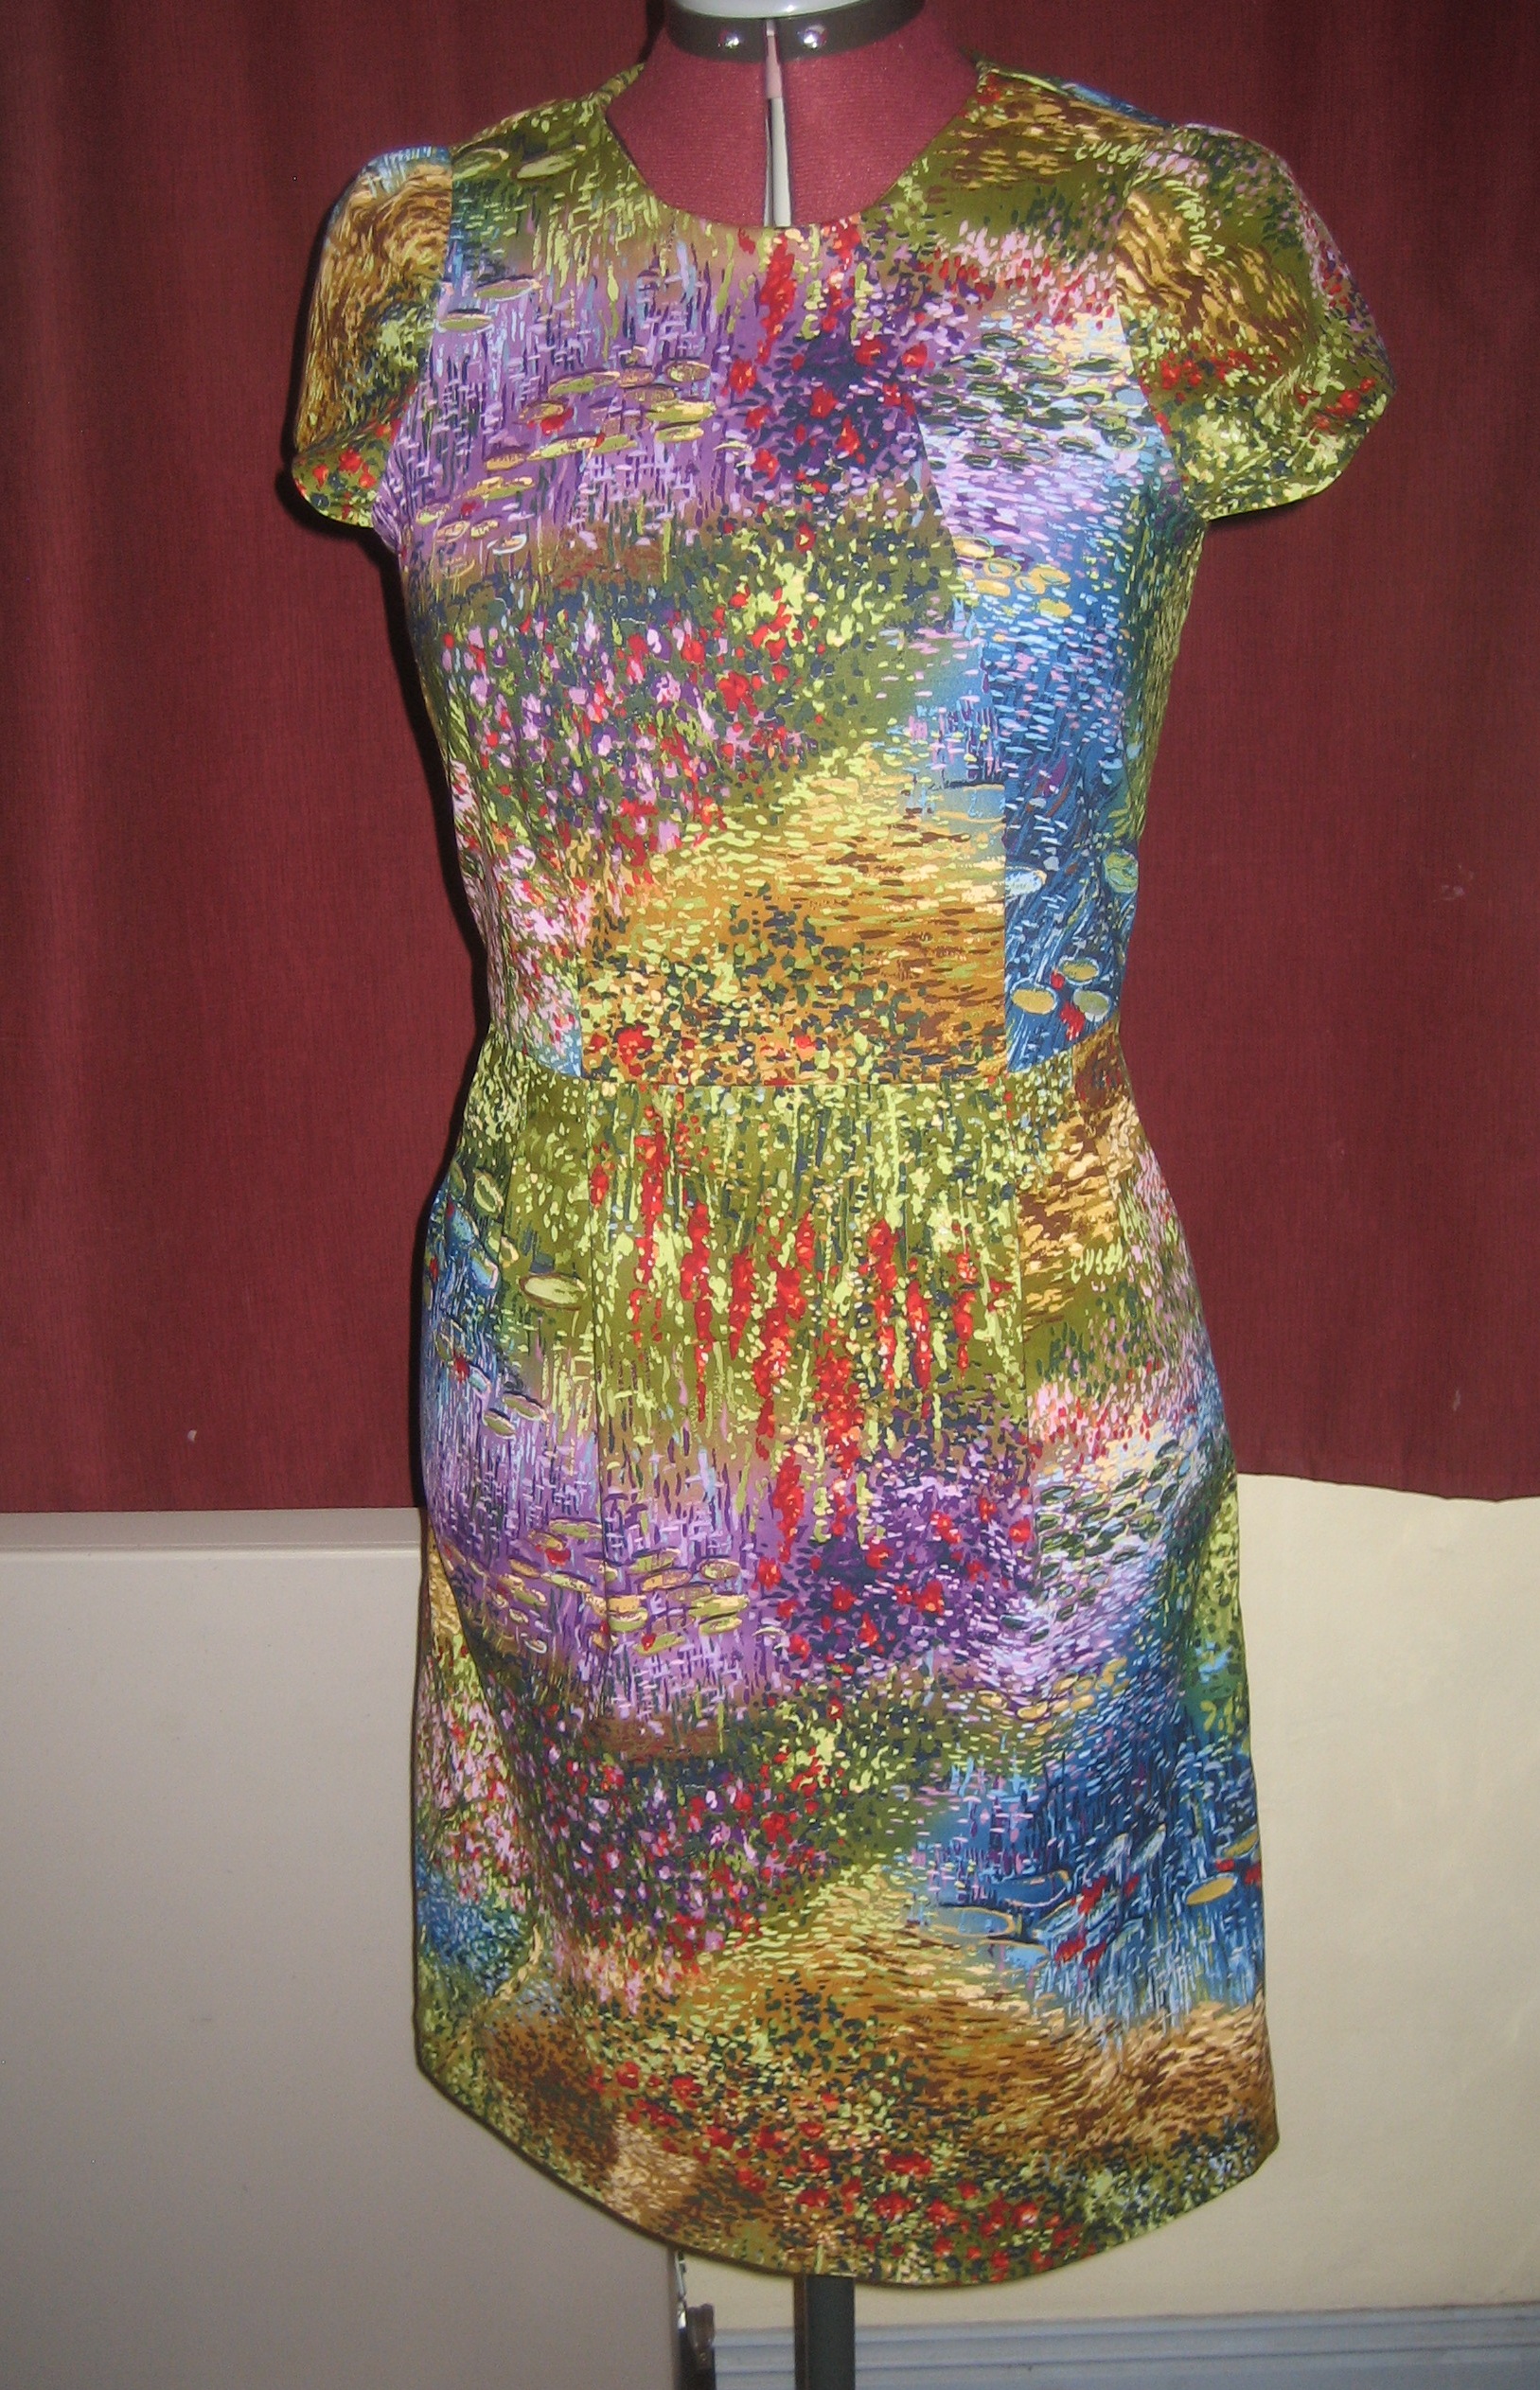 Monet Impression – Sewing Projects | BurdaStyle.com